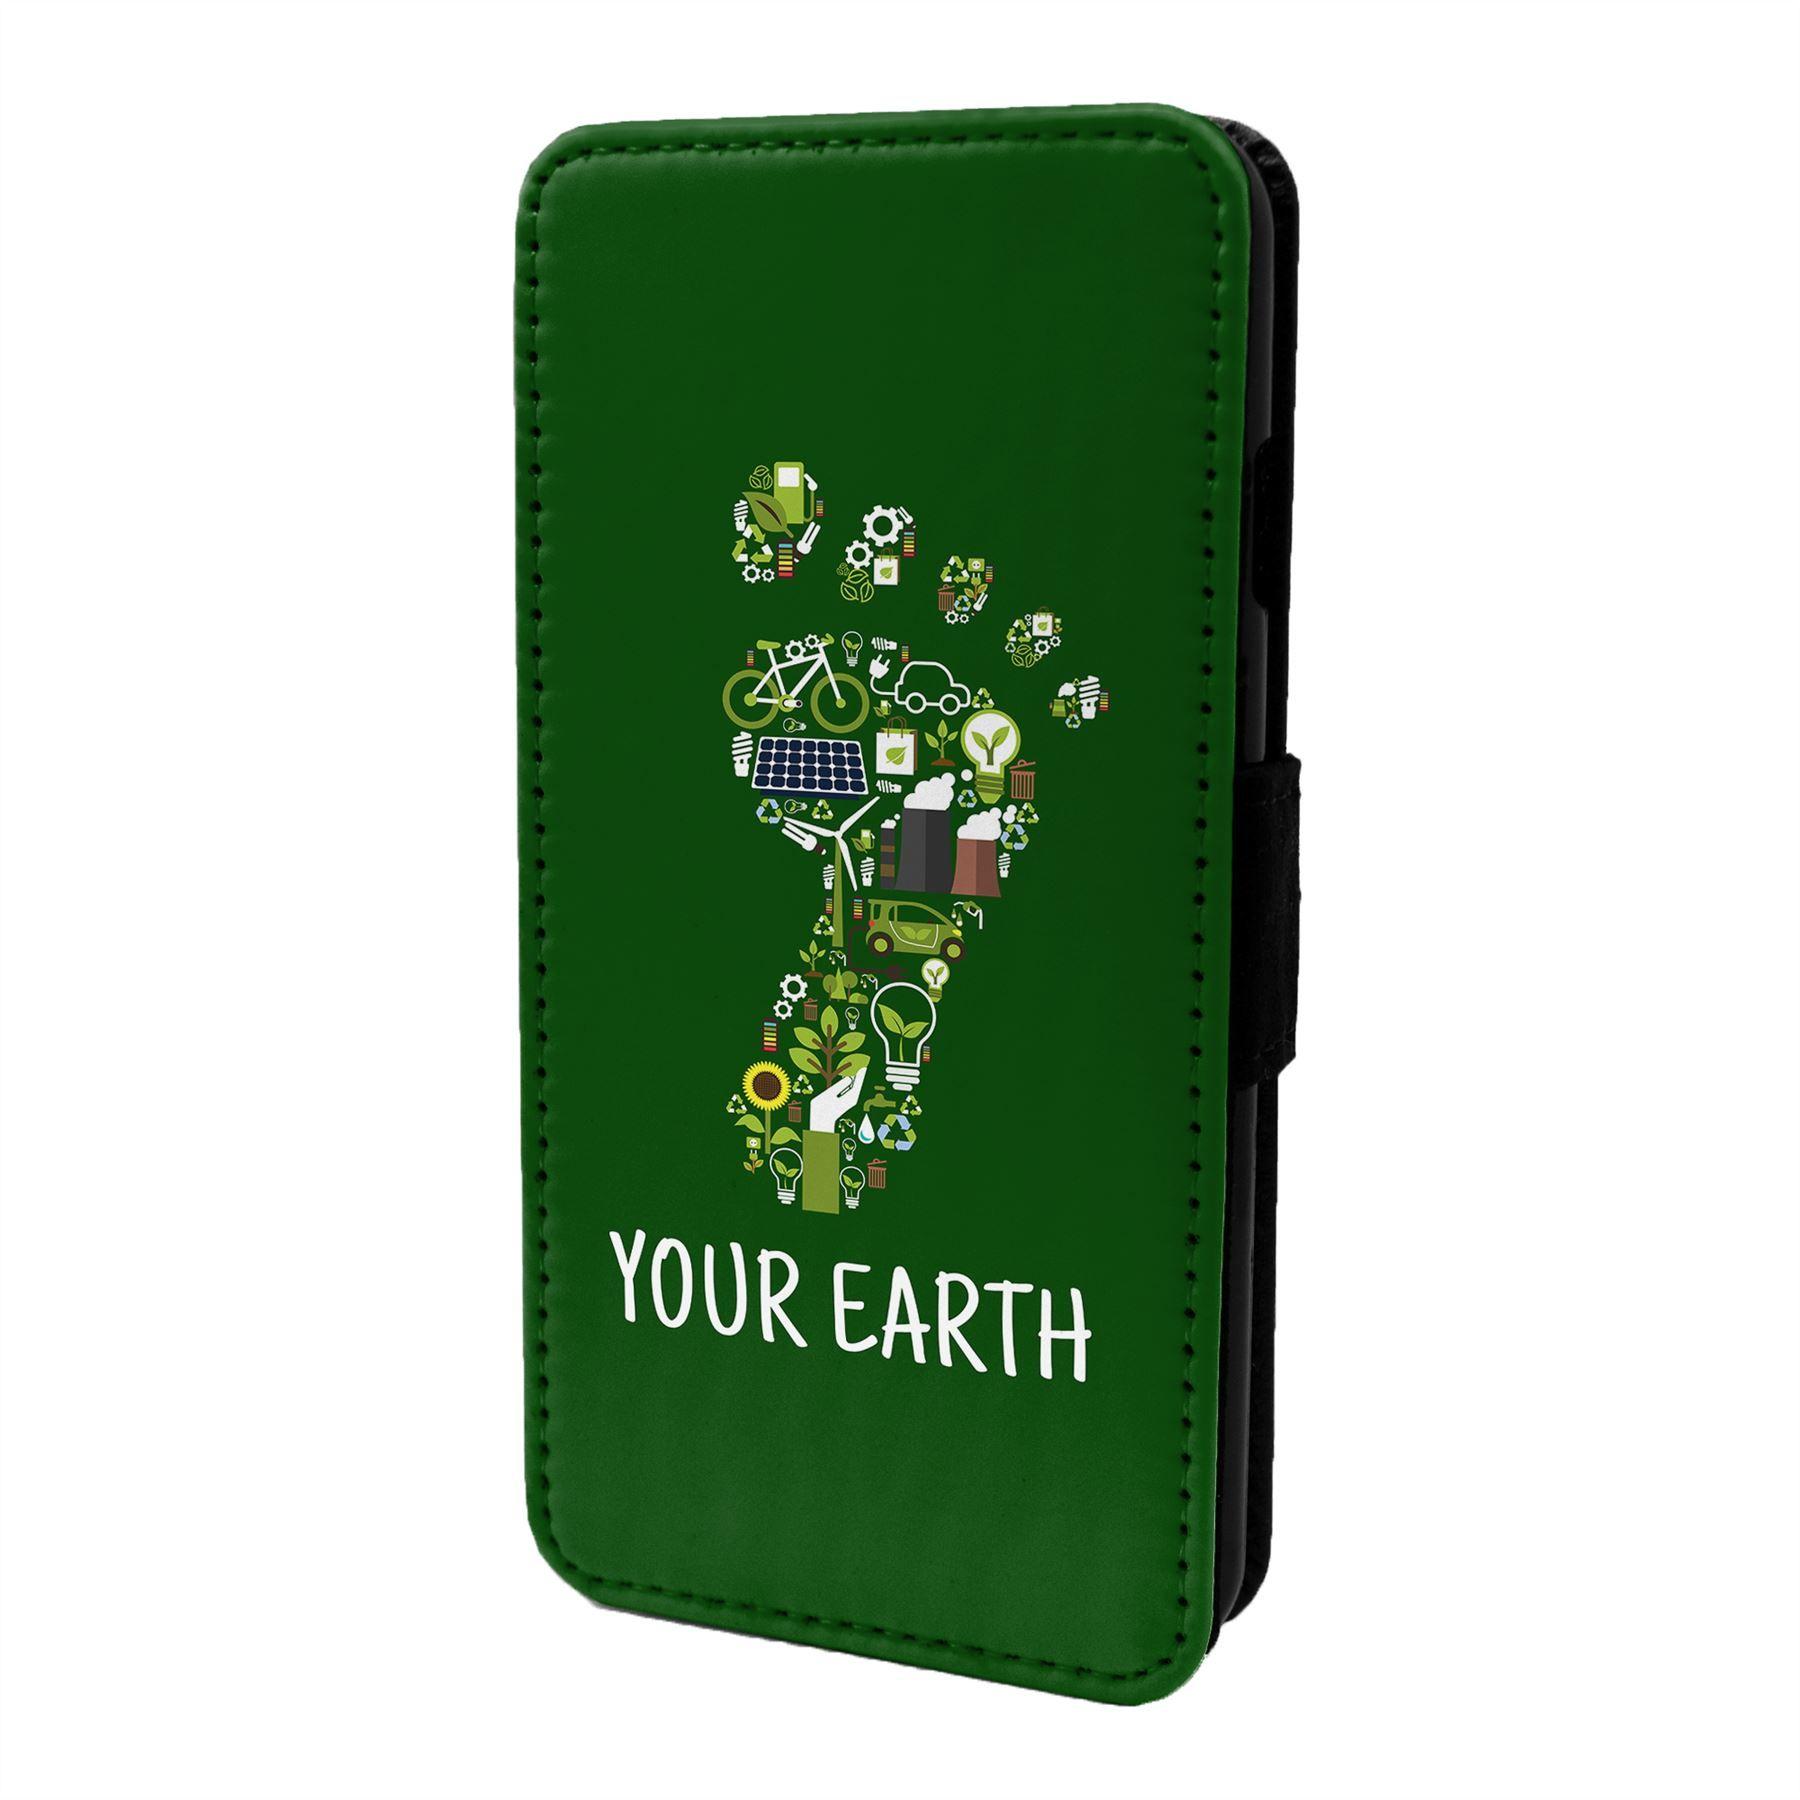 Eco-Friendly Green Logo - Eco Friendly Green Flip Case Cover For Mobile Phone - S5768 | eBay